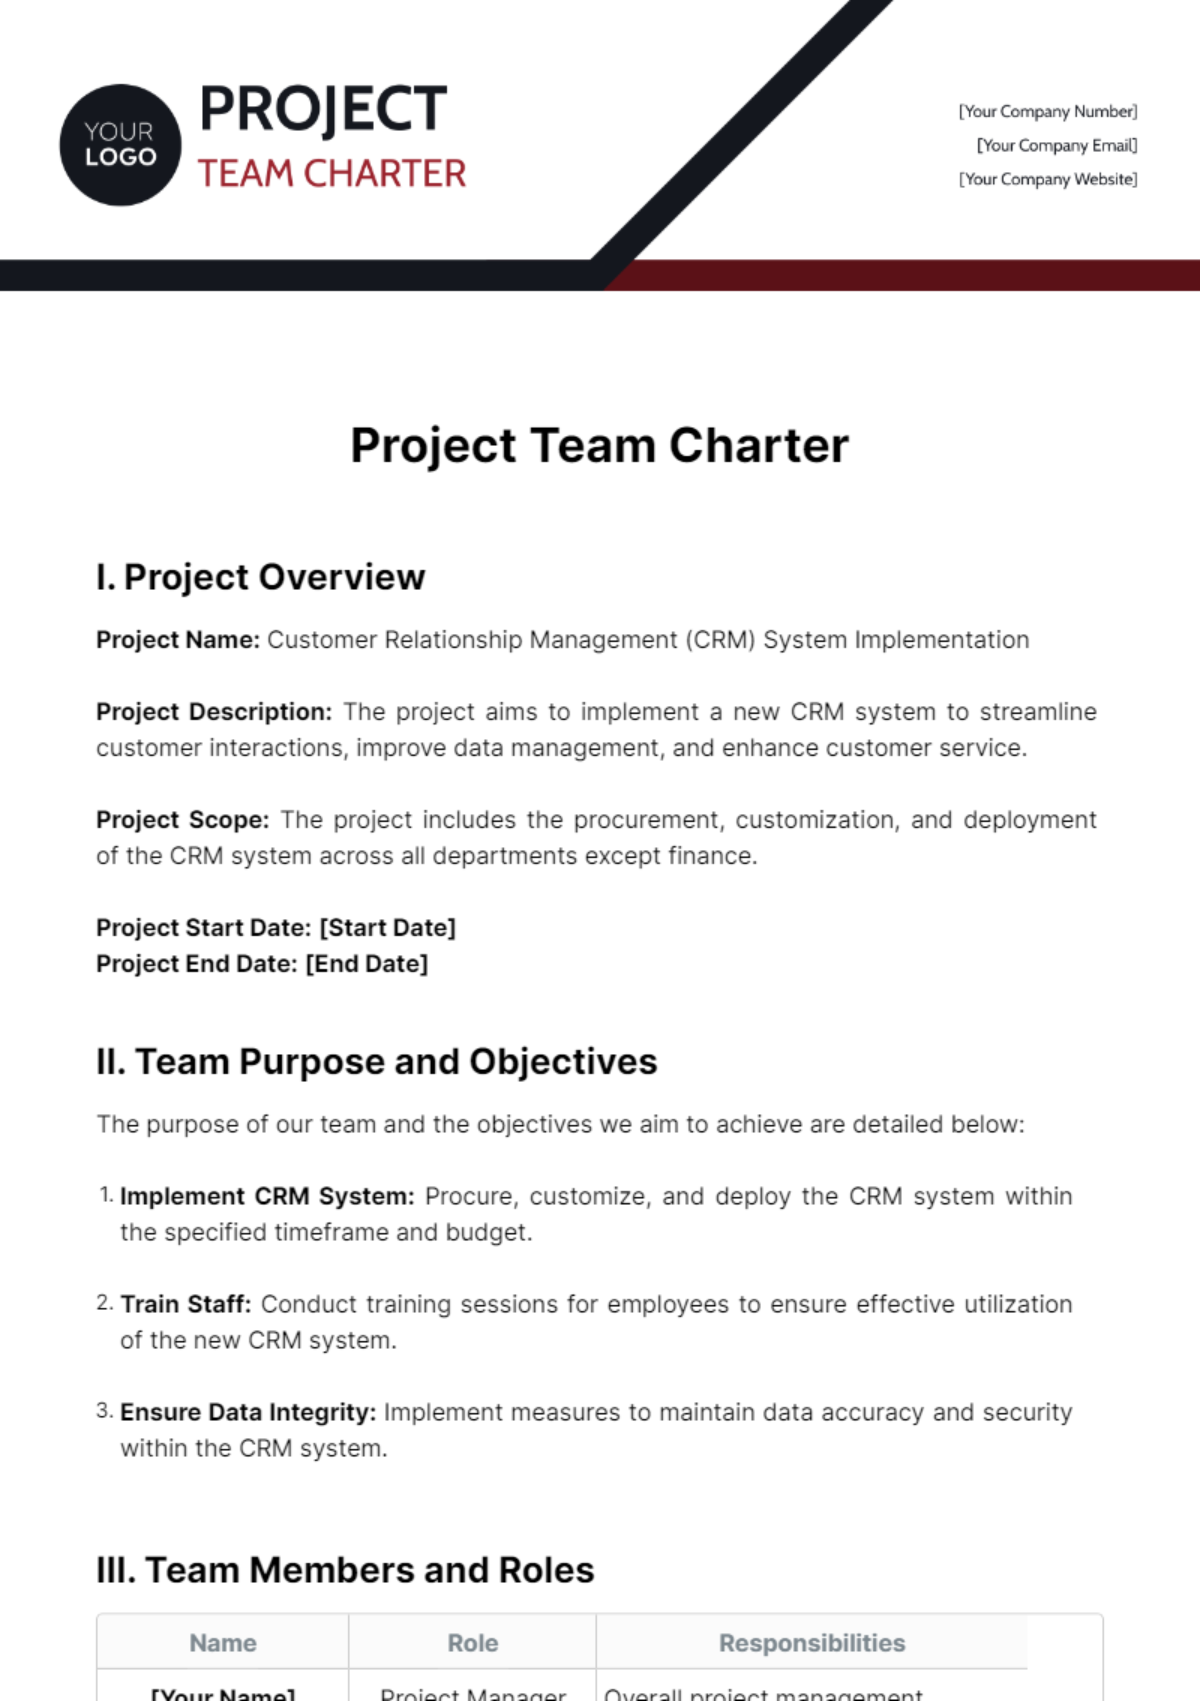 Project Team Charter Template